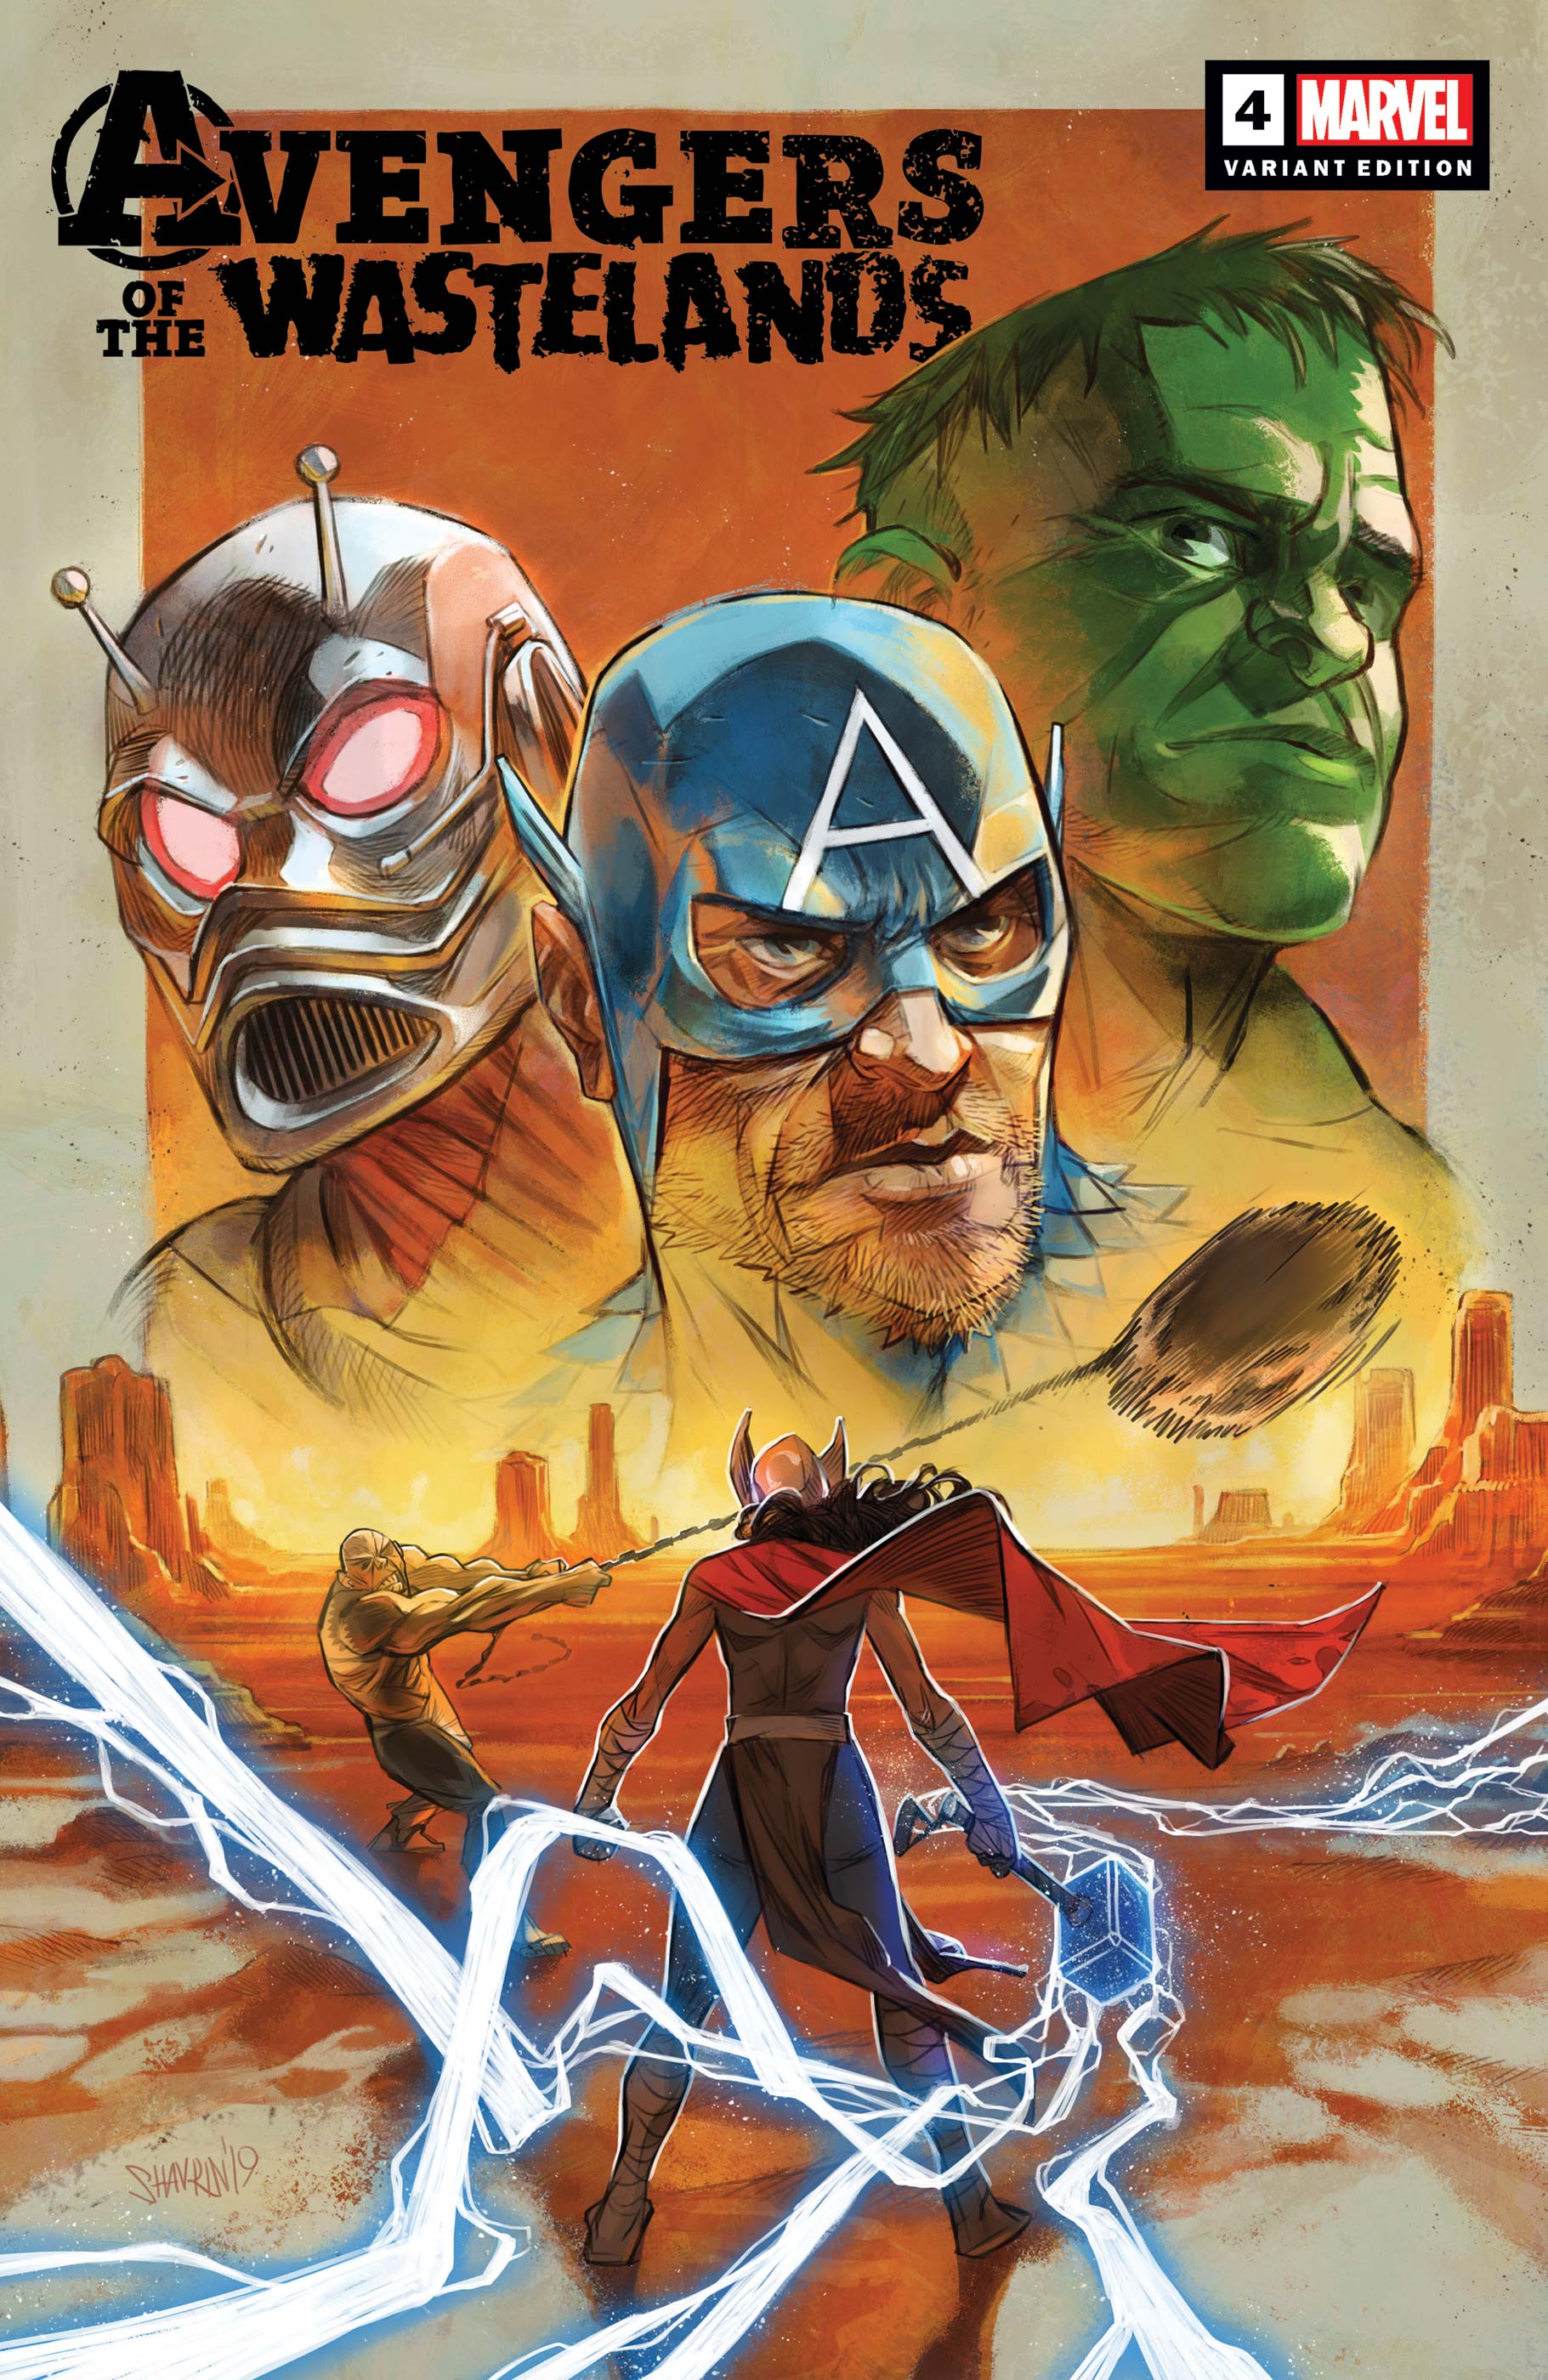 Avengers of the Wastelands (2020) #4 (Variant)